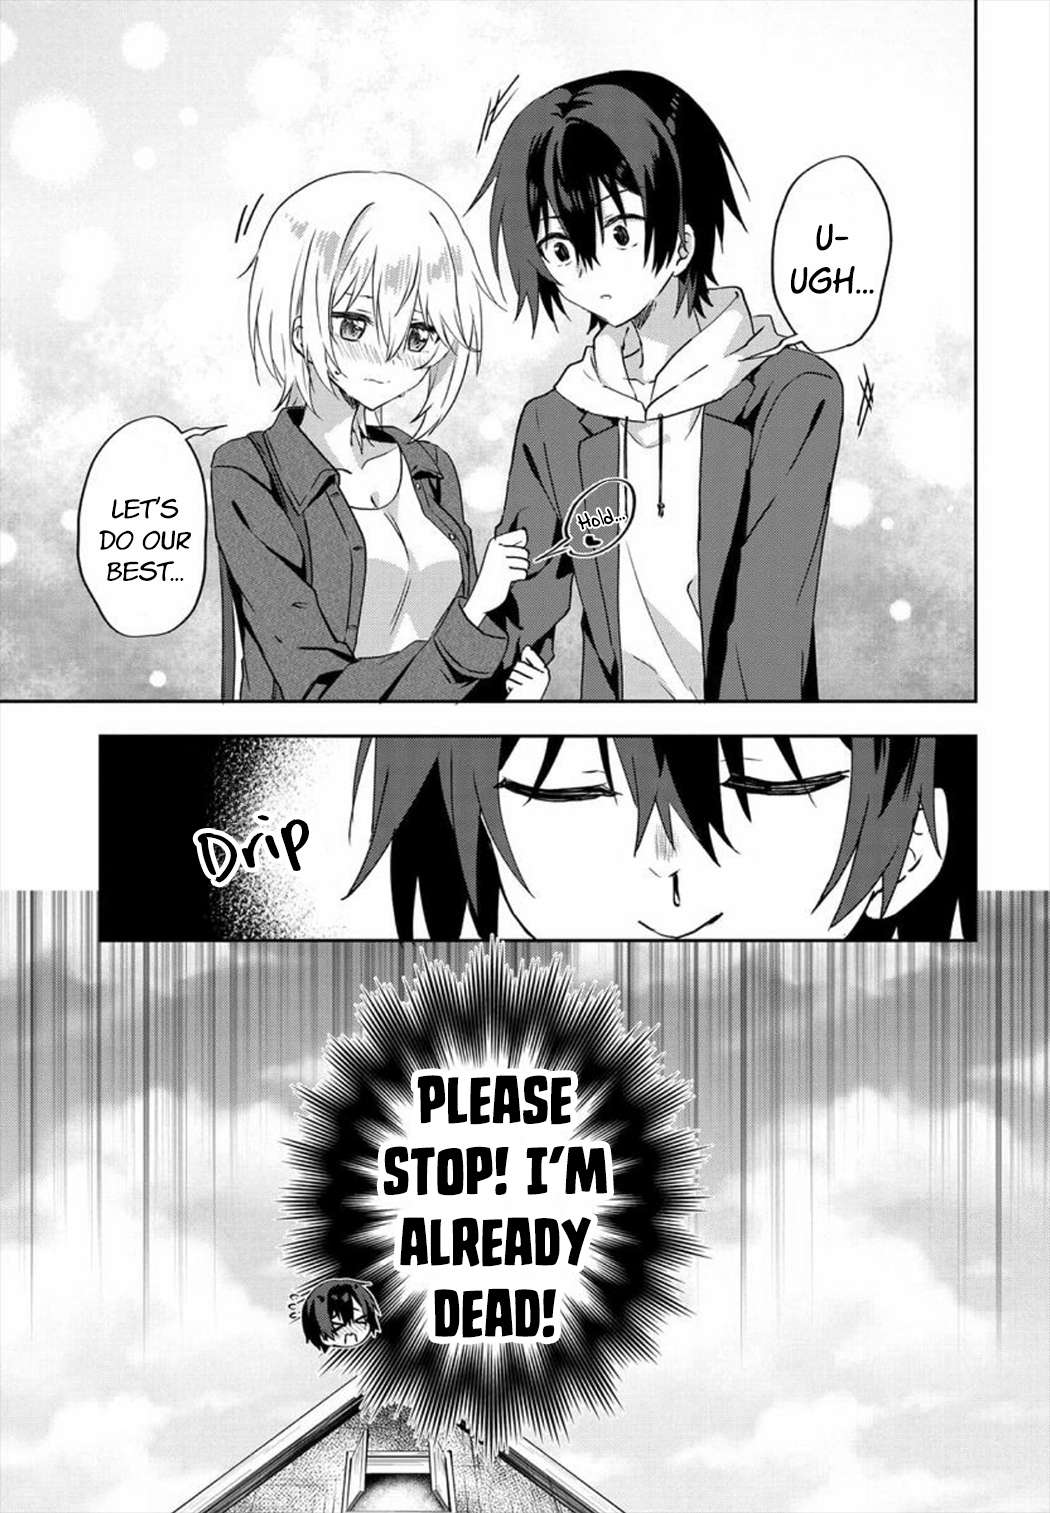 Since I’Ve Entered The World Of Romantic Comedy Manga, I’Ll Do My Best To Make The Losing Heroine Happy - chapter 7.3 - #4